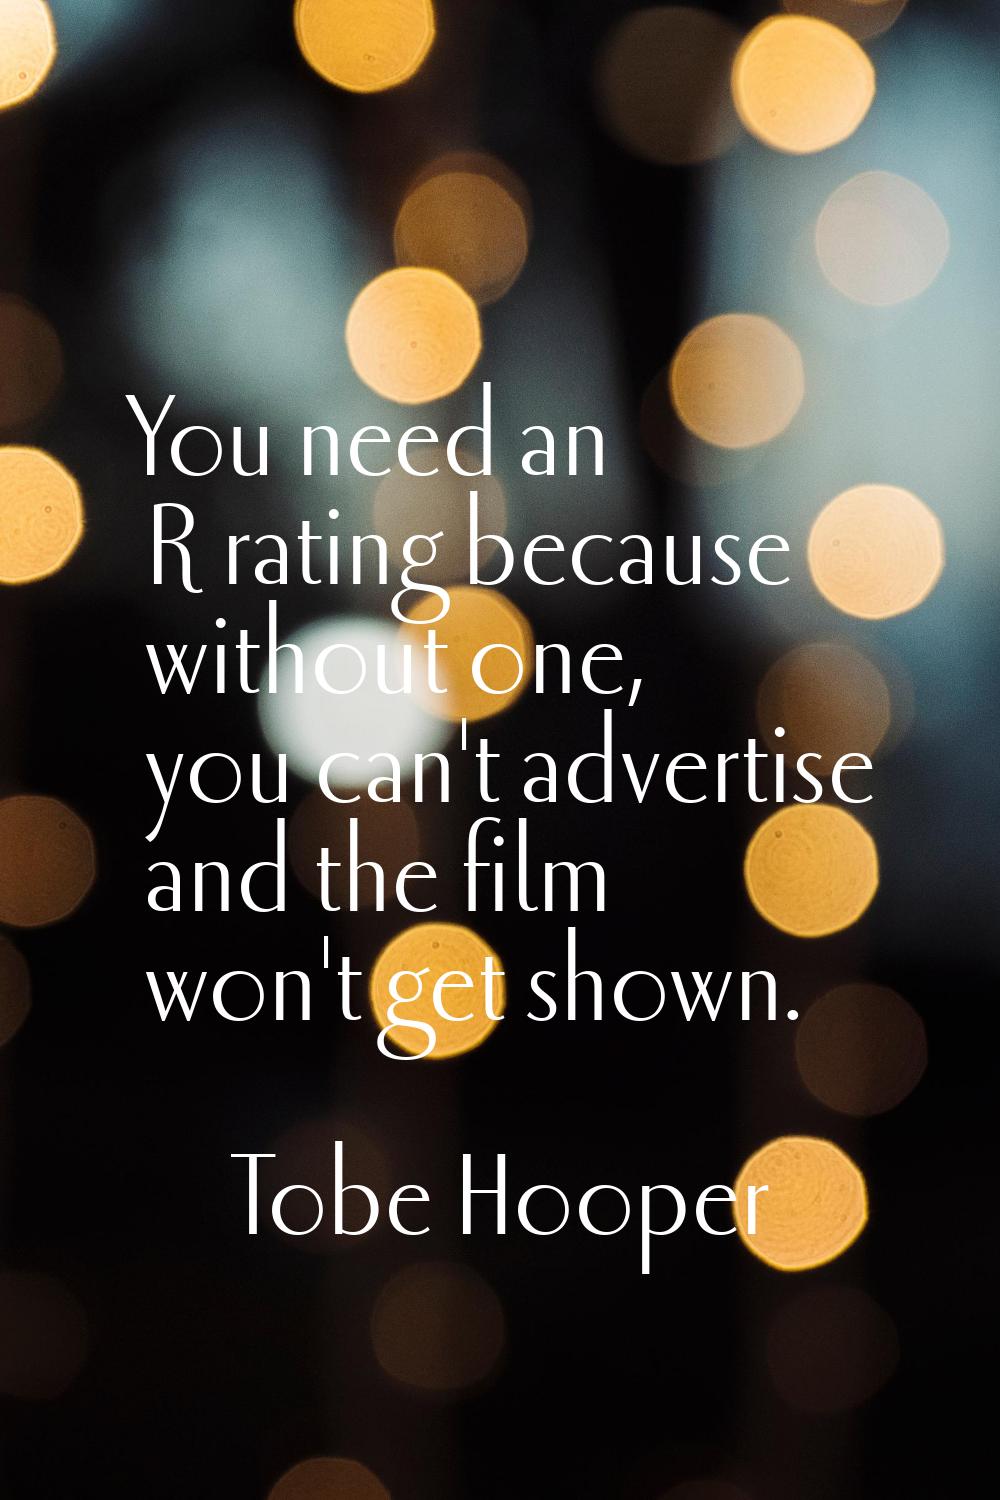 You need an R rating because without one, you can't advertise and the film won't get shown.